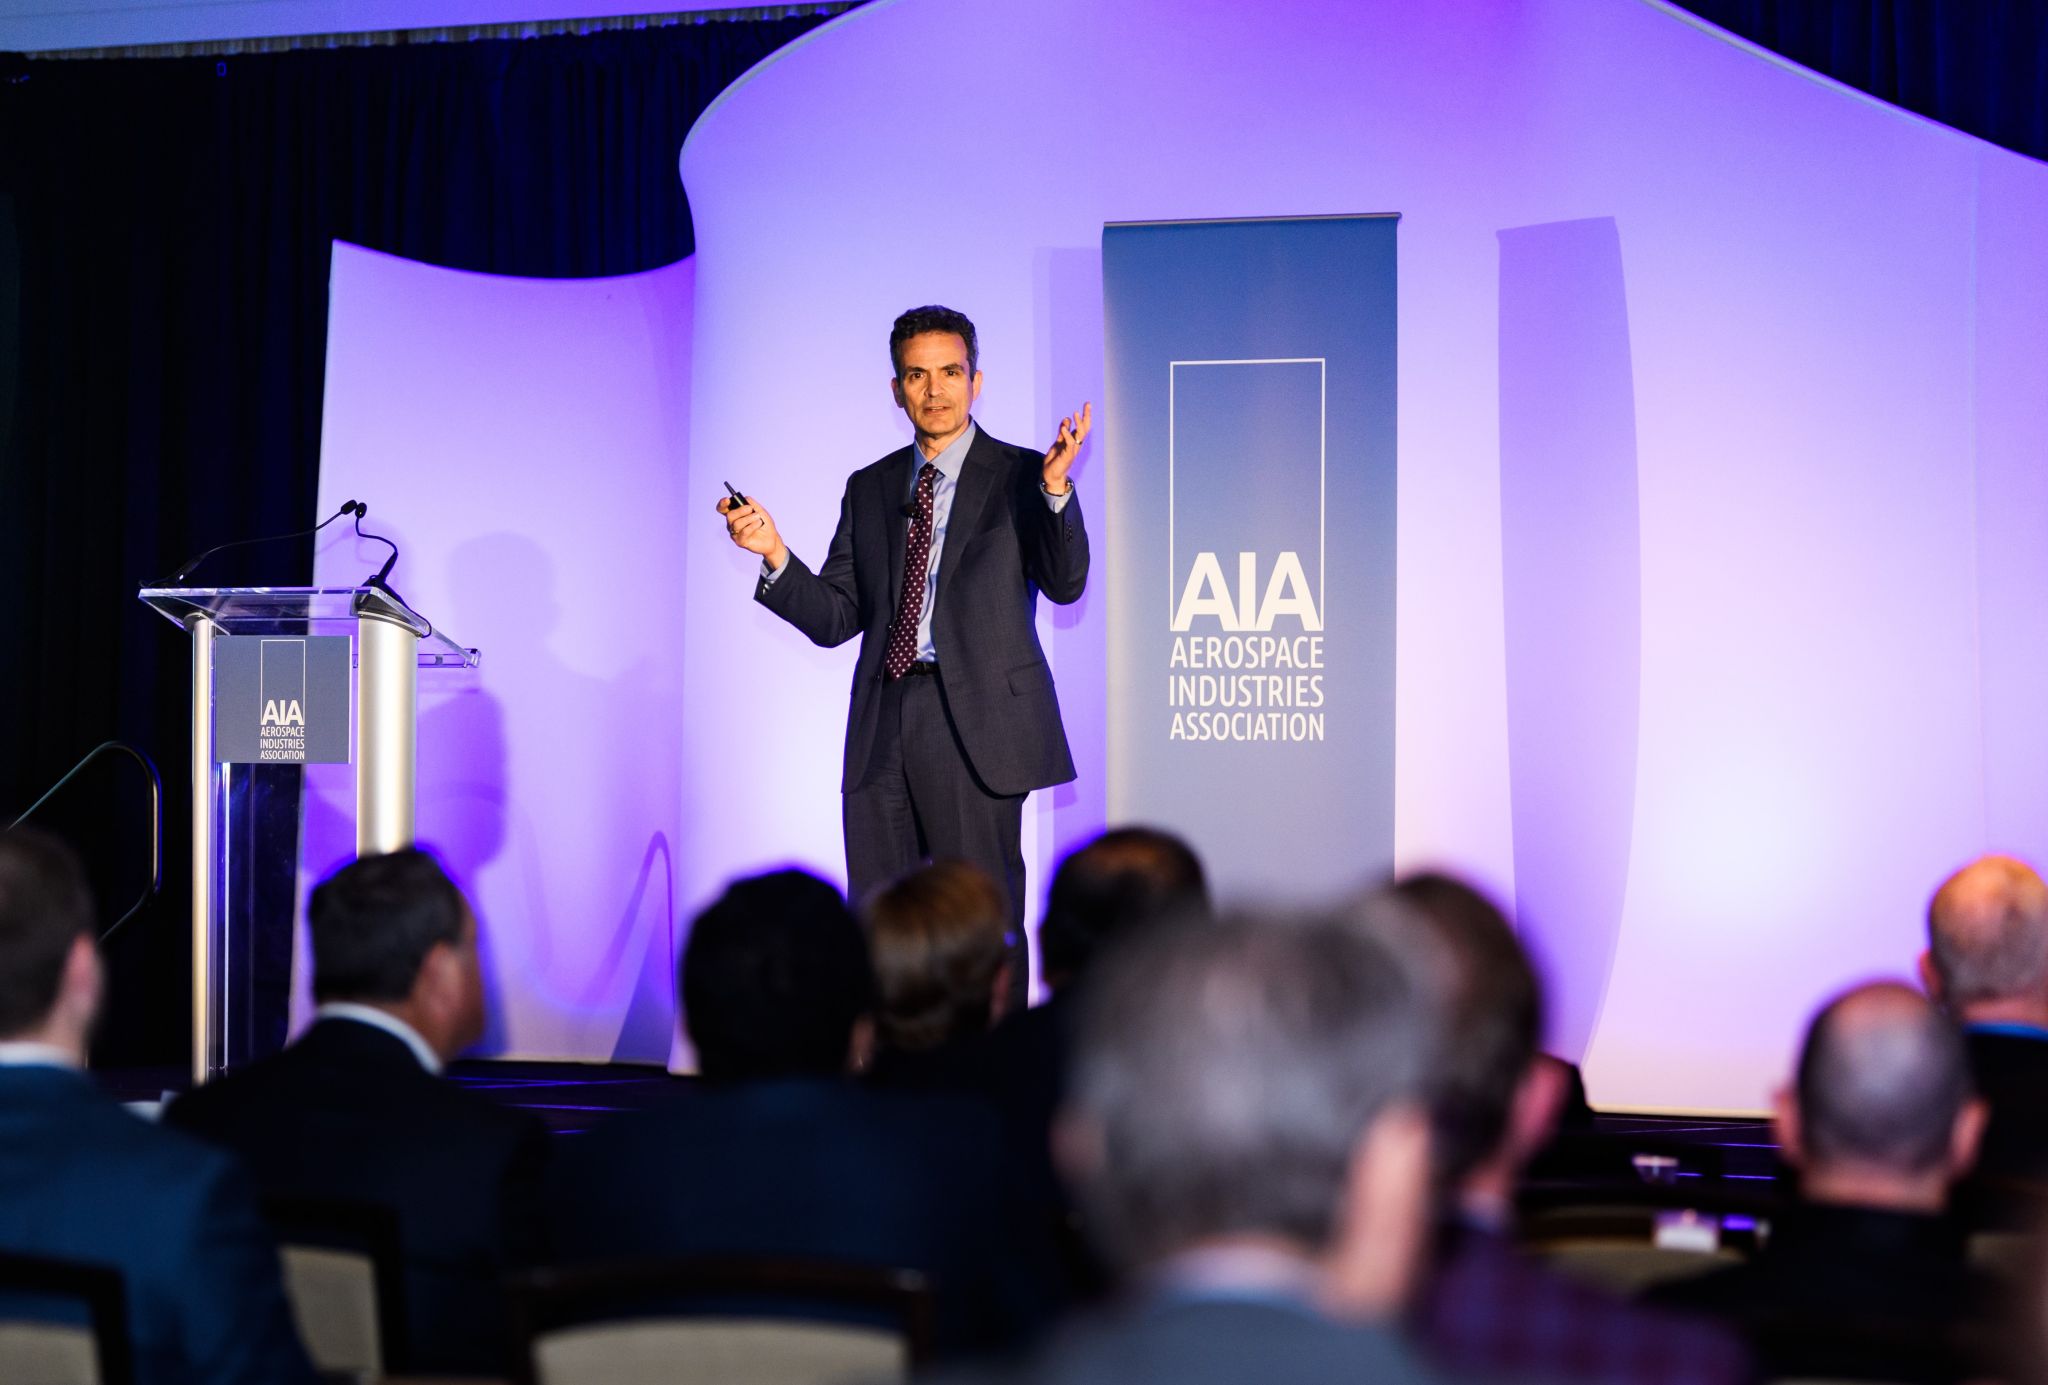 CEO of BAE Systems, Tom Arseneault speaks at AIA conference